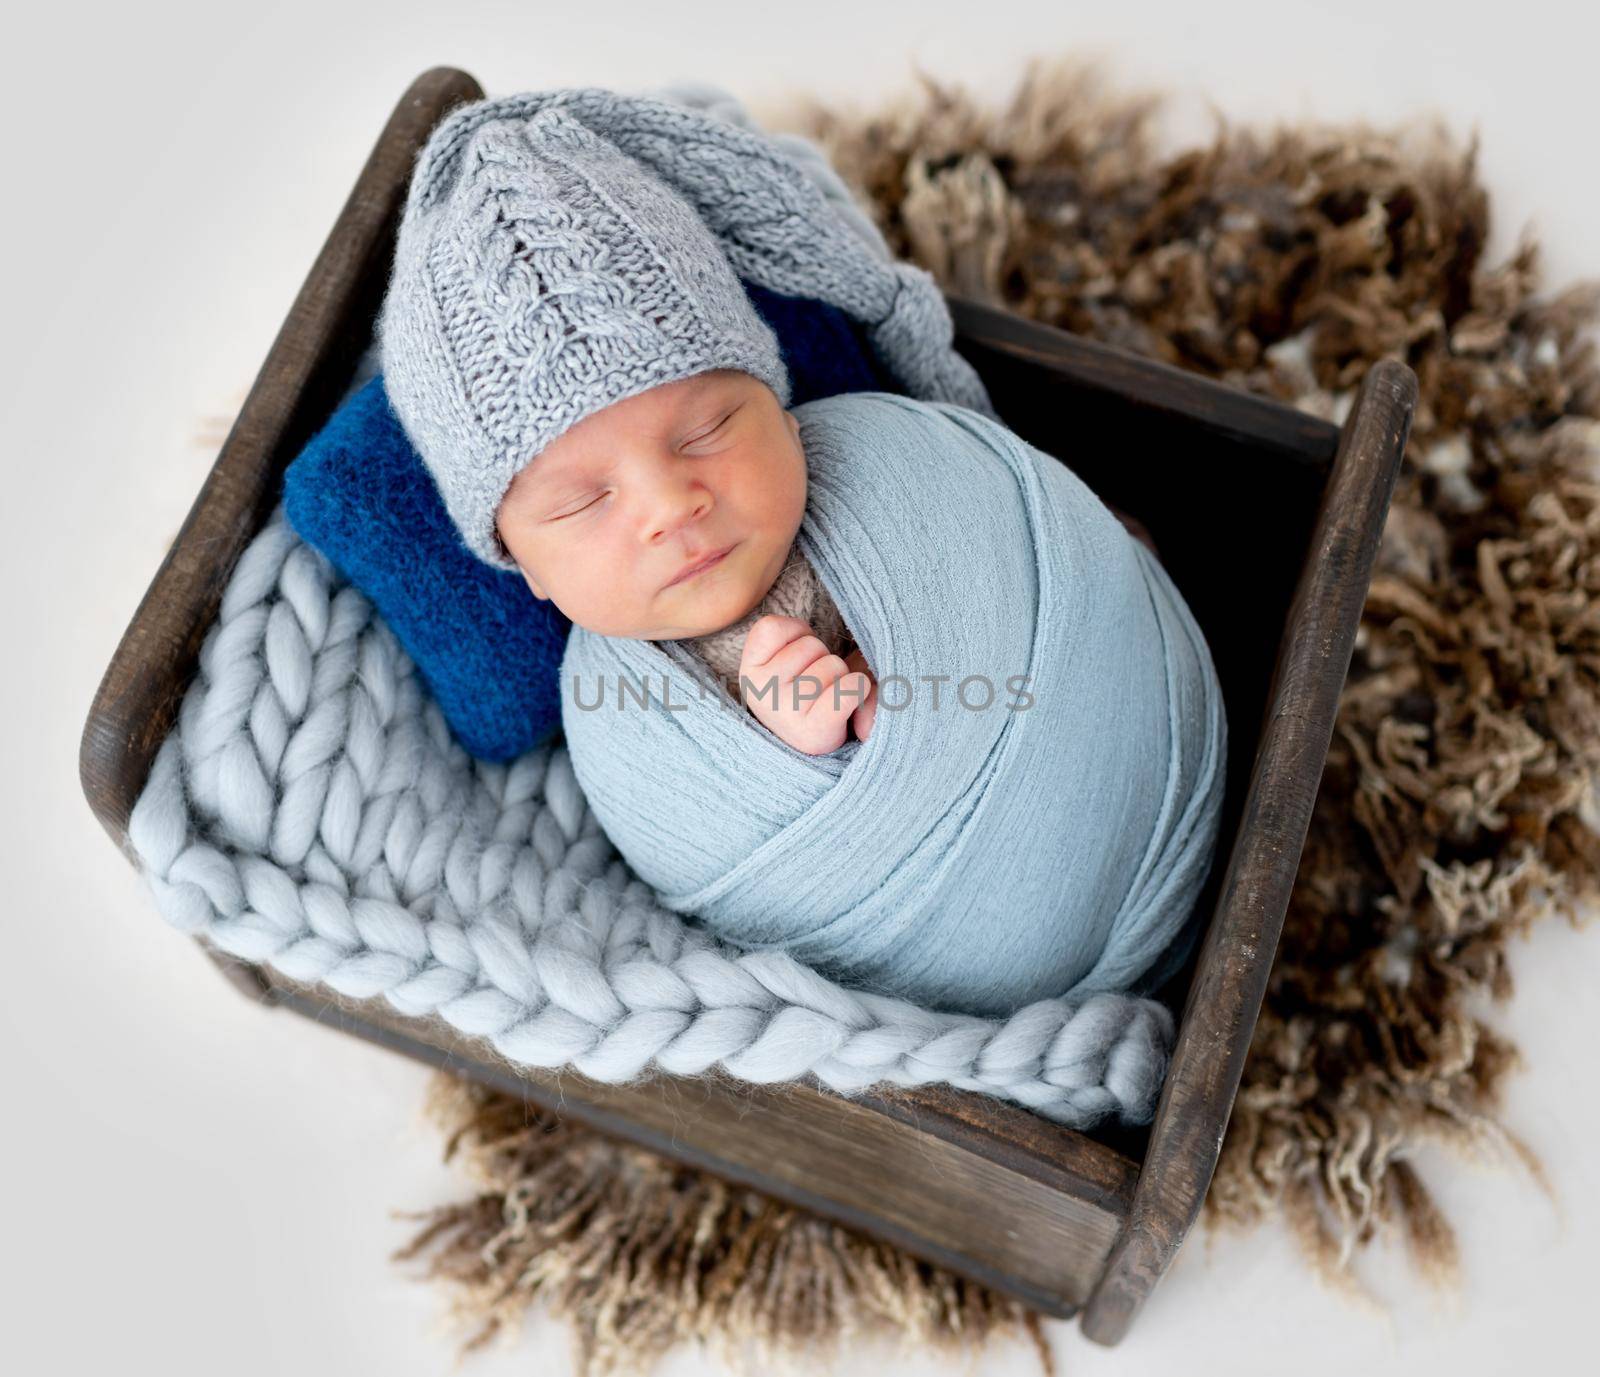 Adorable newborn baby boy swaddled in fabric and wearing cute knitted hat sleeping in wooden stylized bed in studio. Infant child napping indoors